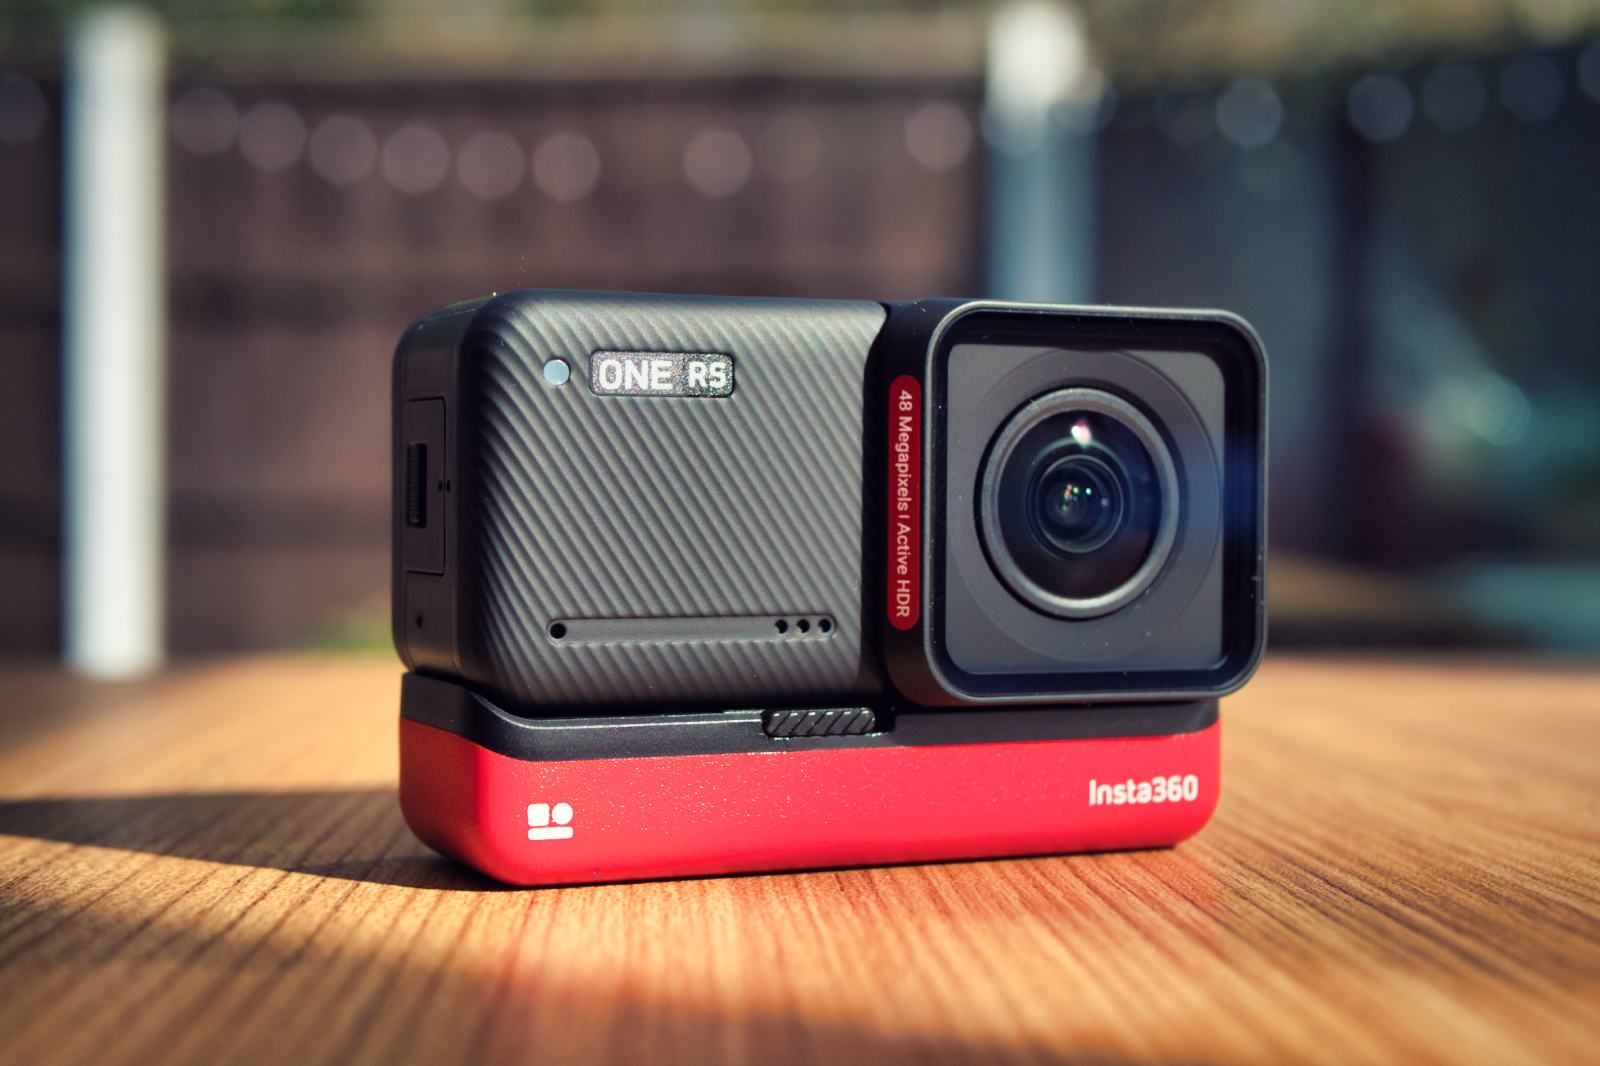 https://static1.pocketlintimages.com/wordpress/wp-content/uploads/160427-cameras-review-insta360-one-rs-review-the-best-of-both-worlds-image6-uinwlujxwc.jpg